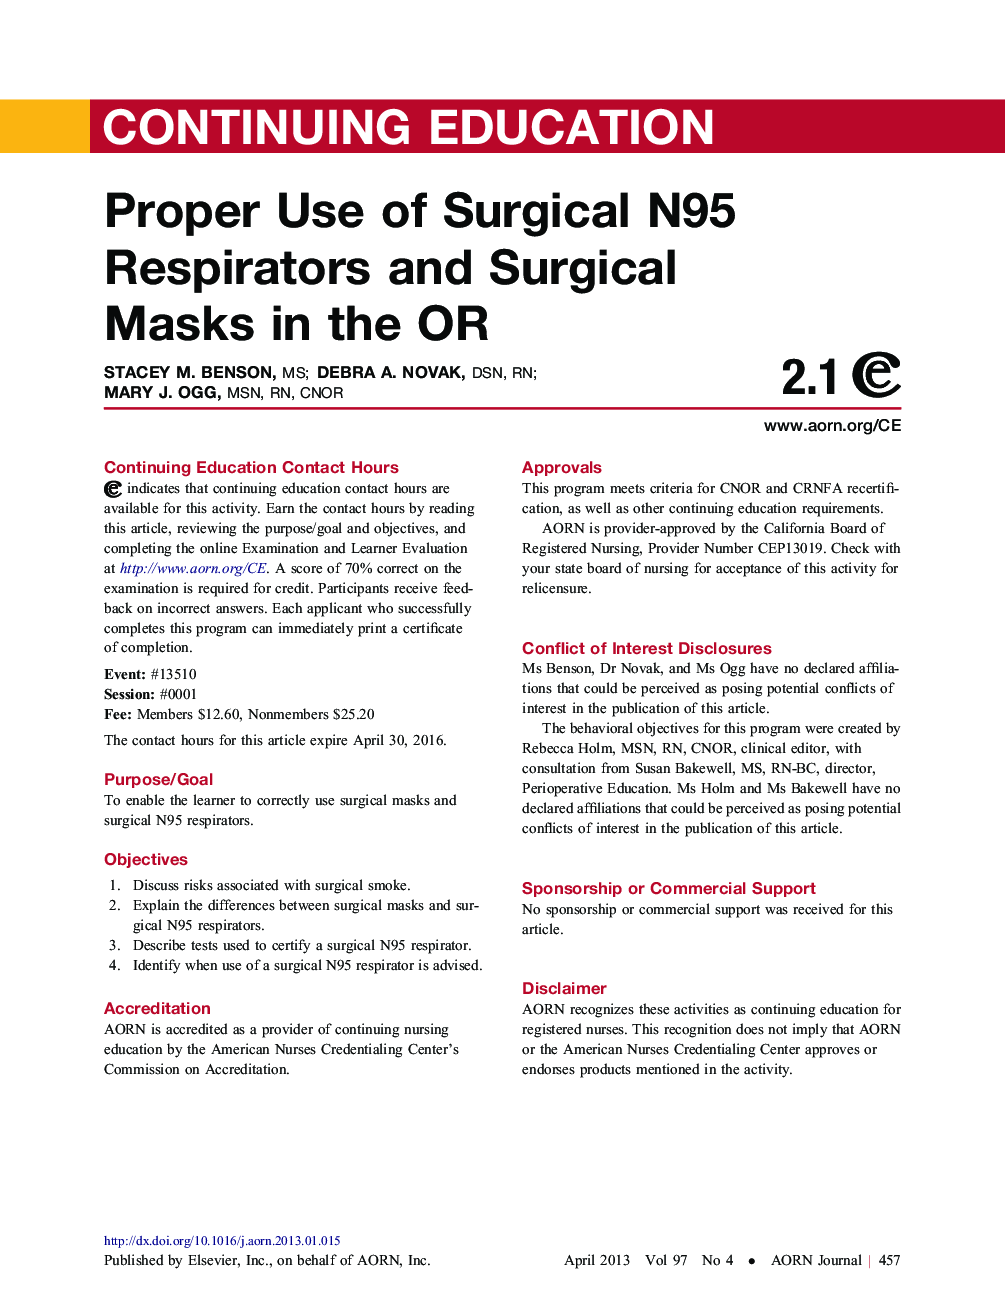 Proper Use of Surgical N95 Respirators and Surgical Masks in the OR